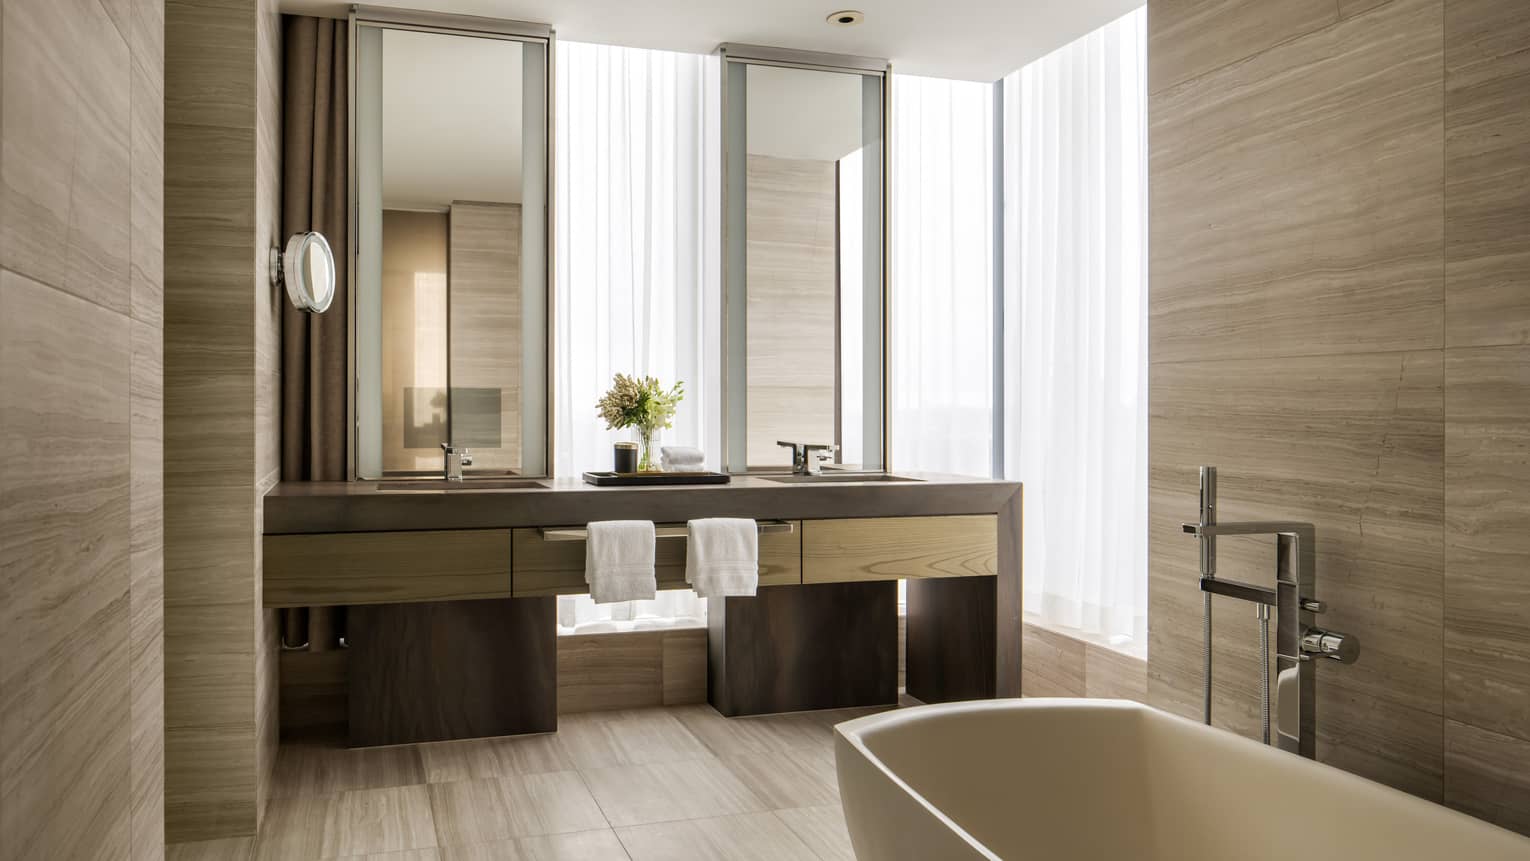 Hotel suite bathroom with double vanity and standalone tub at Four Seasons Hotel Toronto